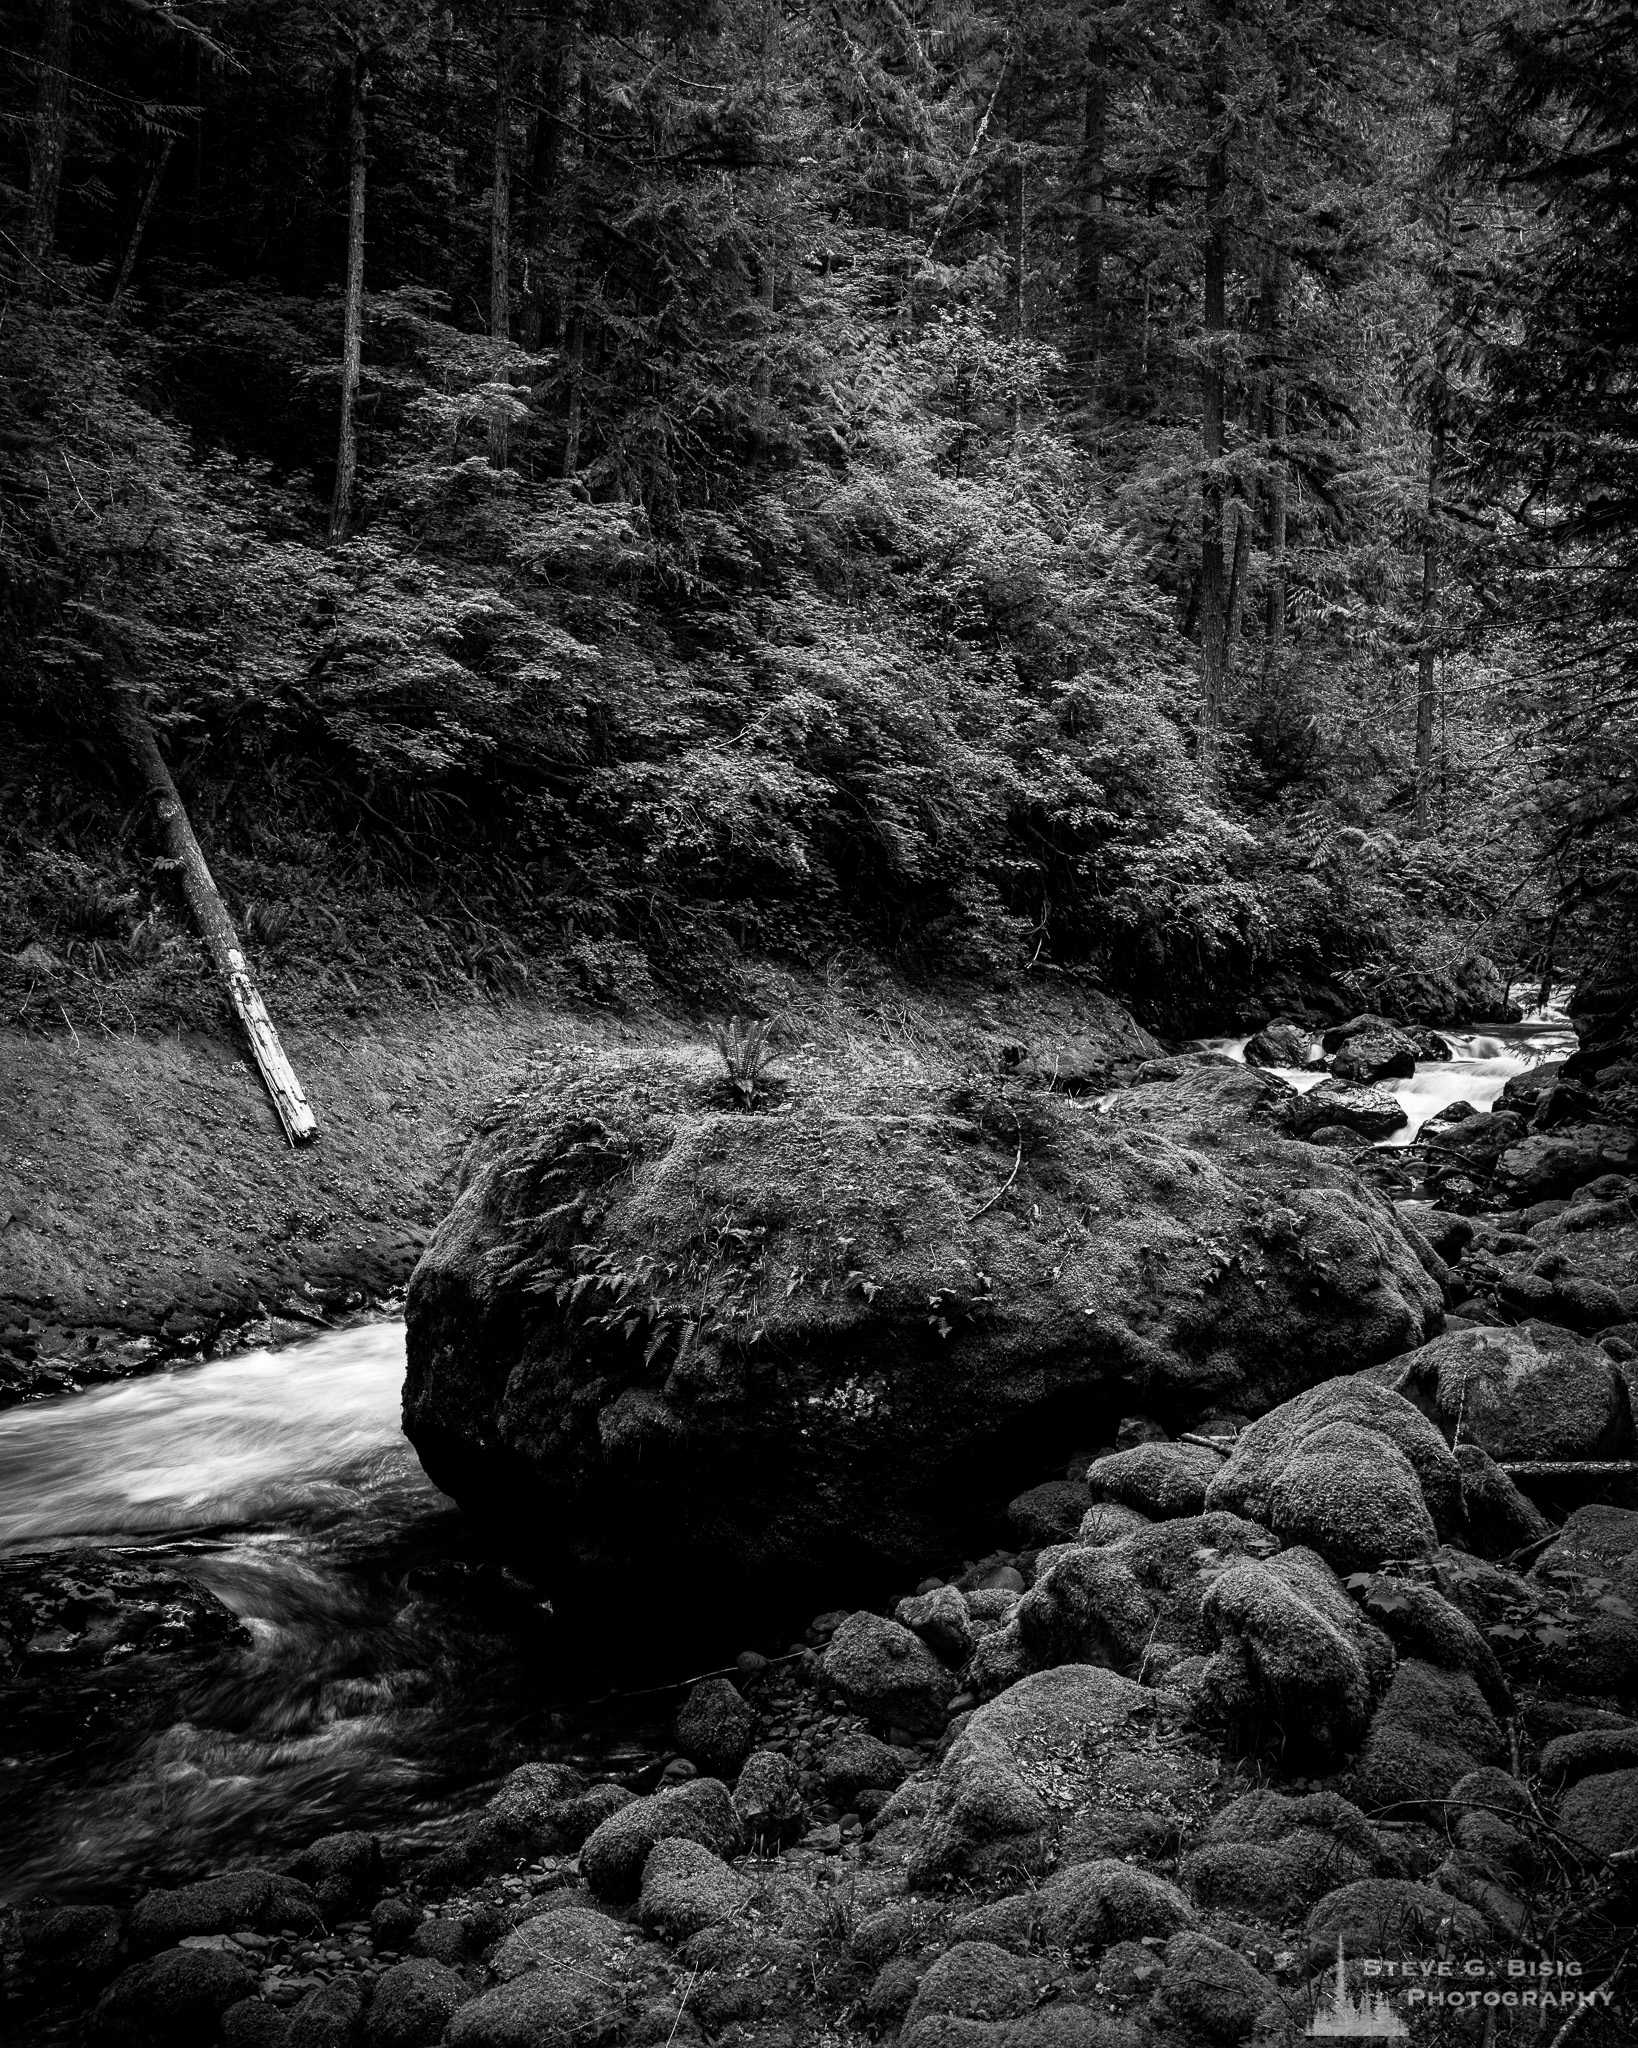 A landscape photograph of moss-covered rocks in a stream bed found along Forest Road 52 (Skate Creek Road) in the Gifford Pinchot National Forest, Washington.